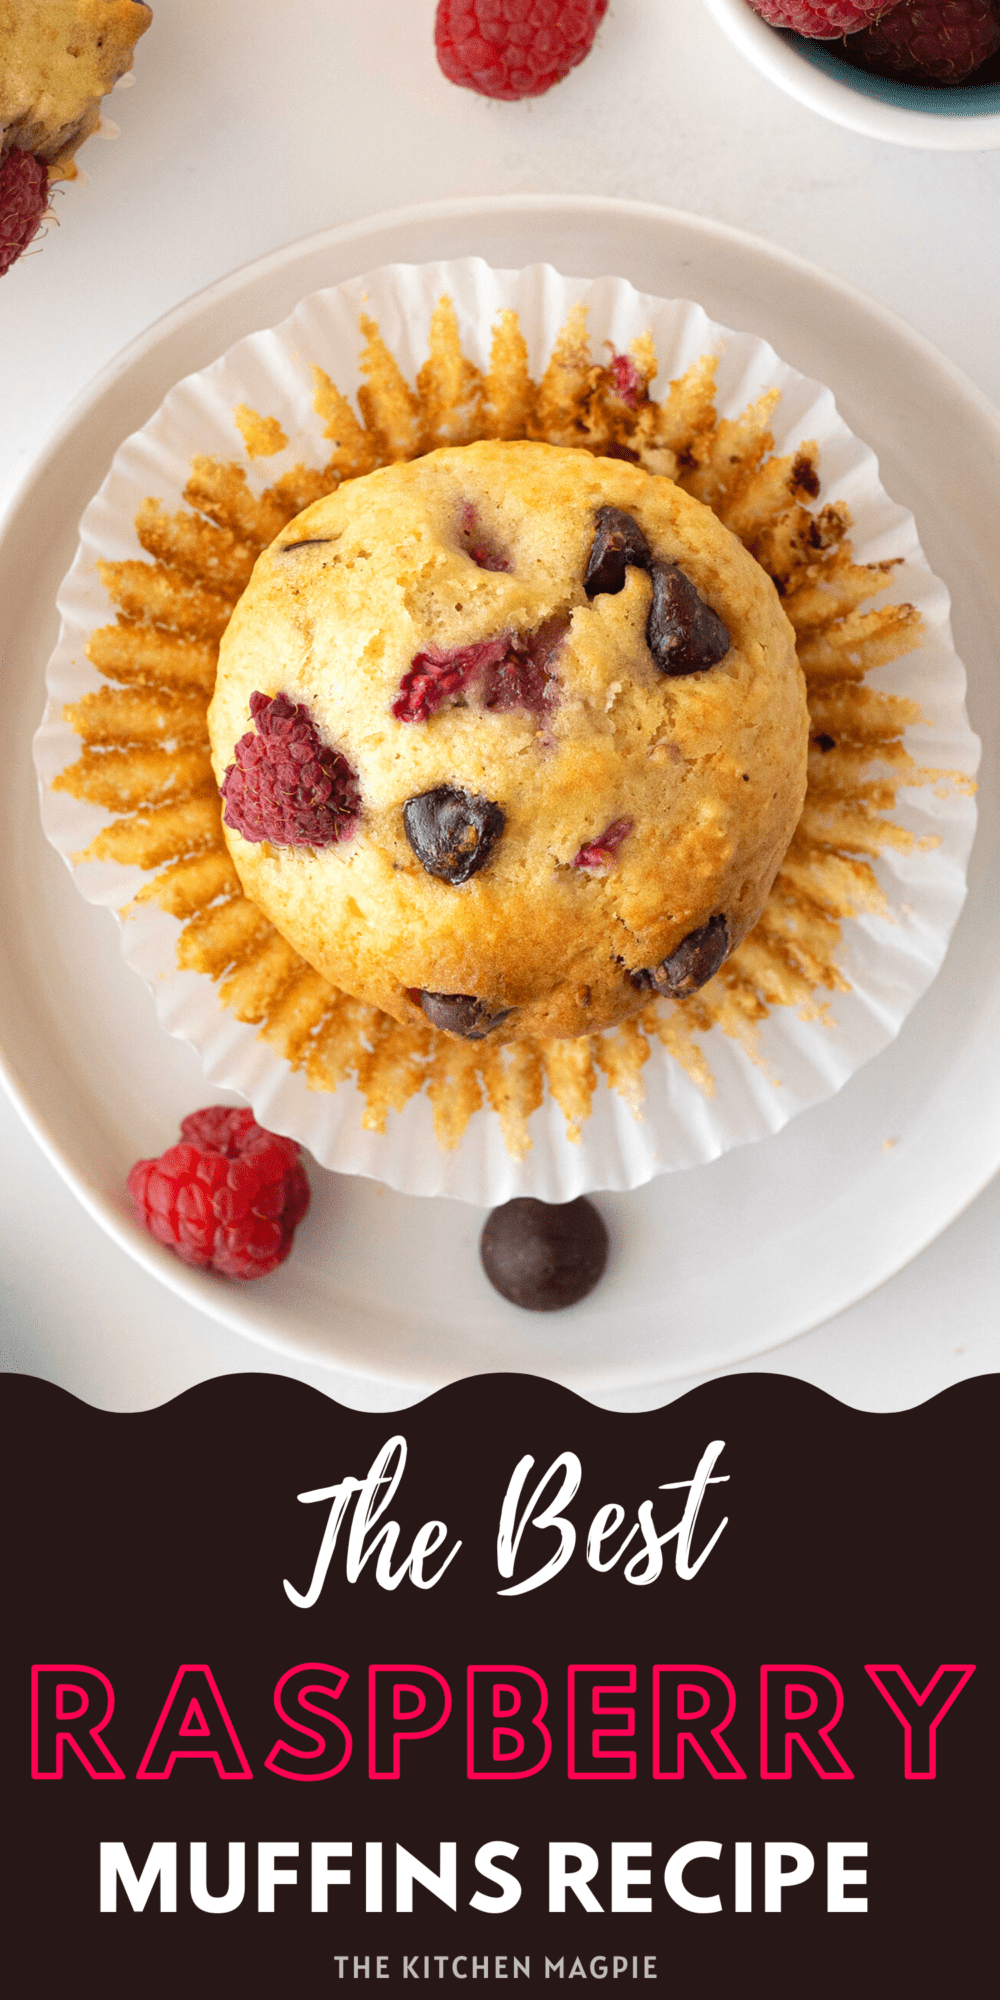 These raspberry muffins are an easy and delicious way to use up your summertime berry bounty! Add chocolate chips for a decadent treat! 